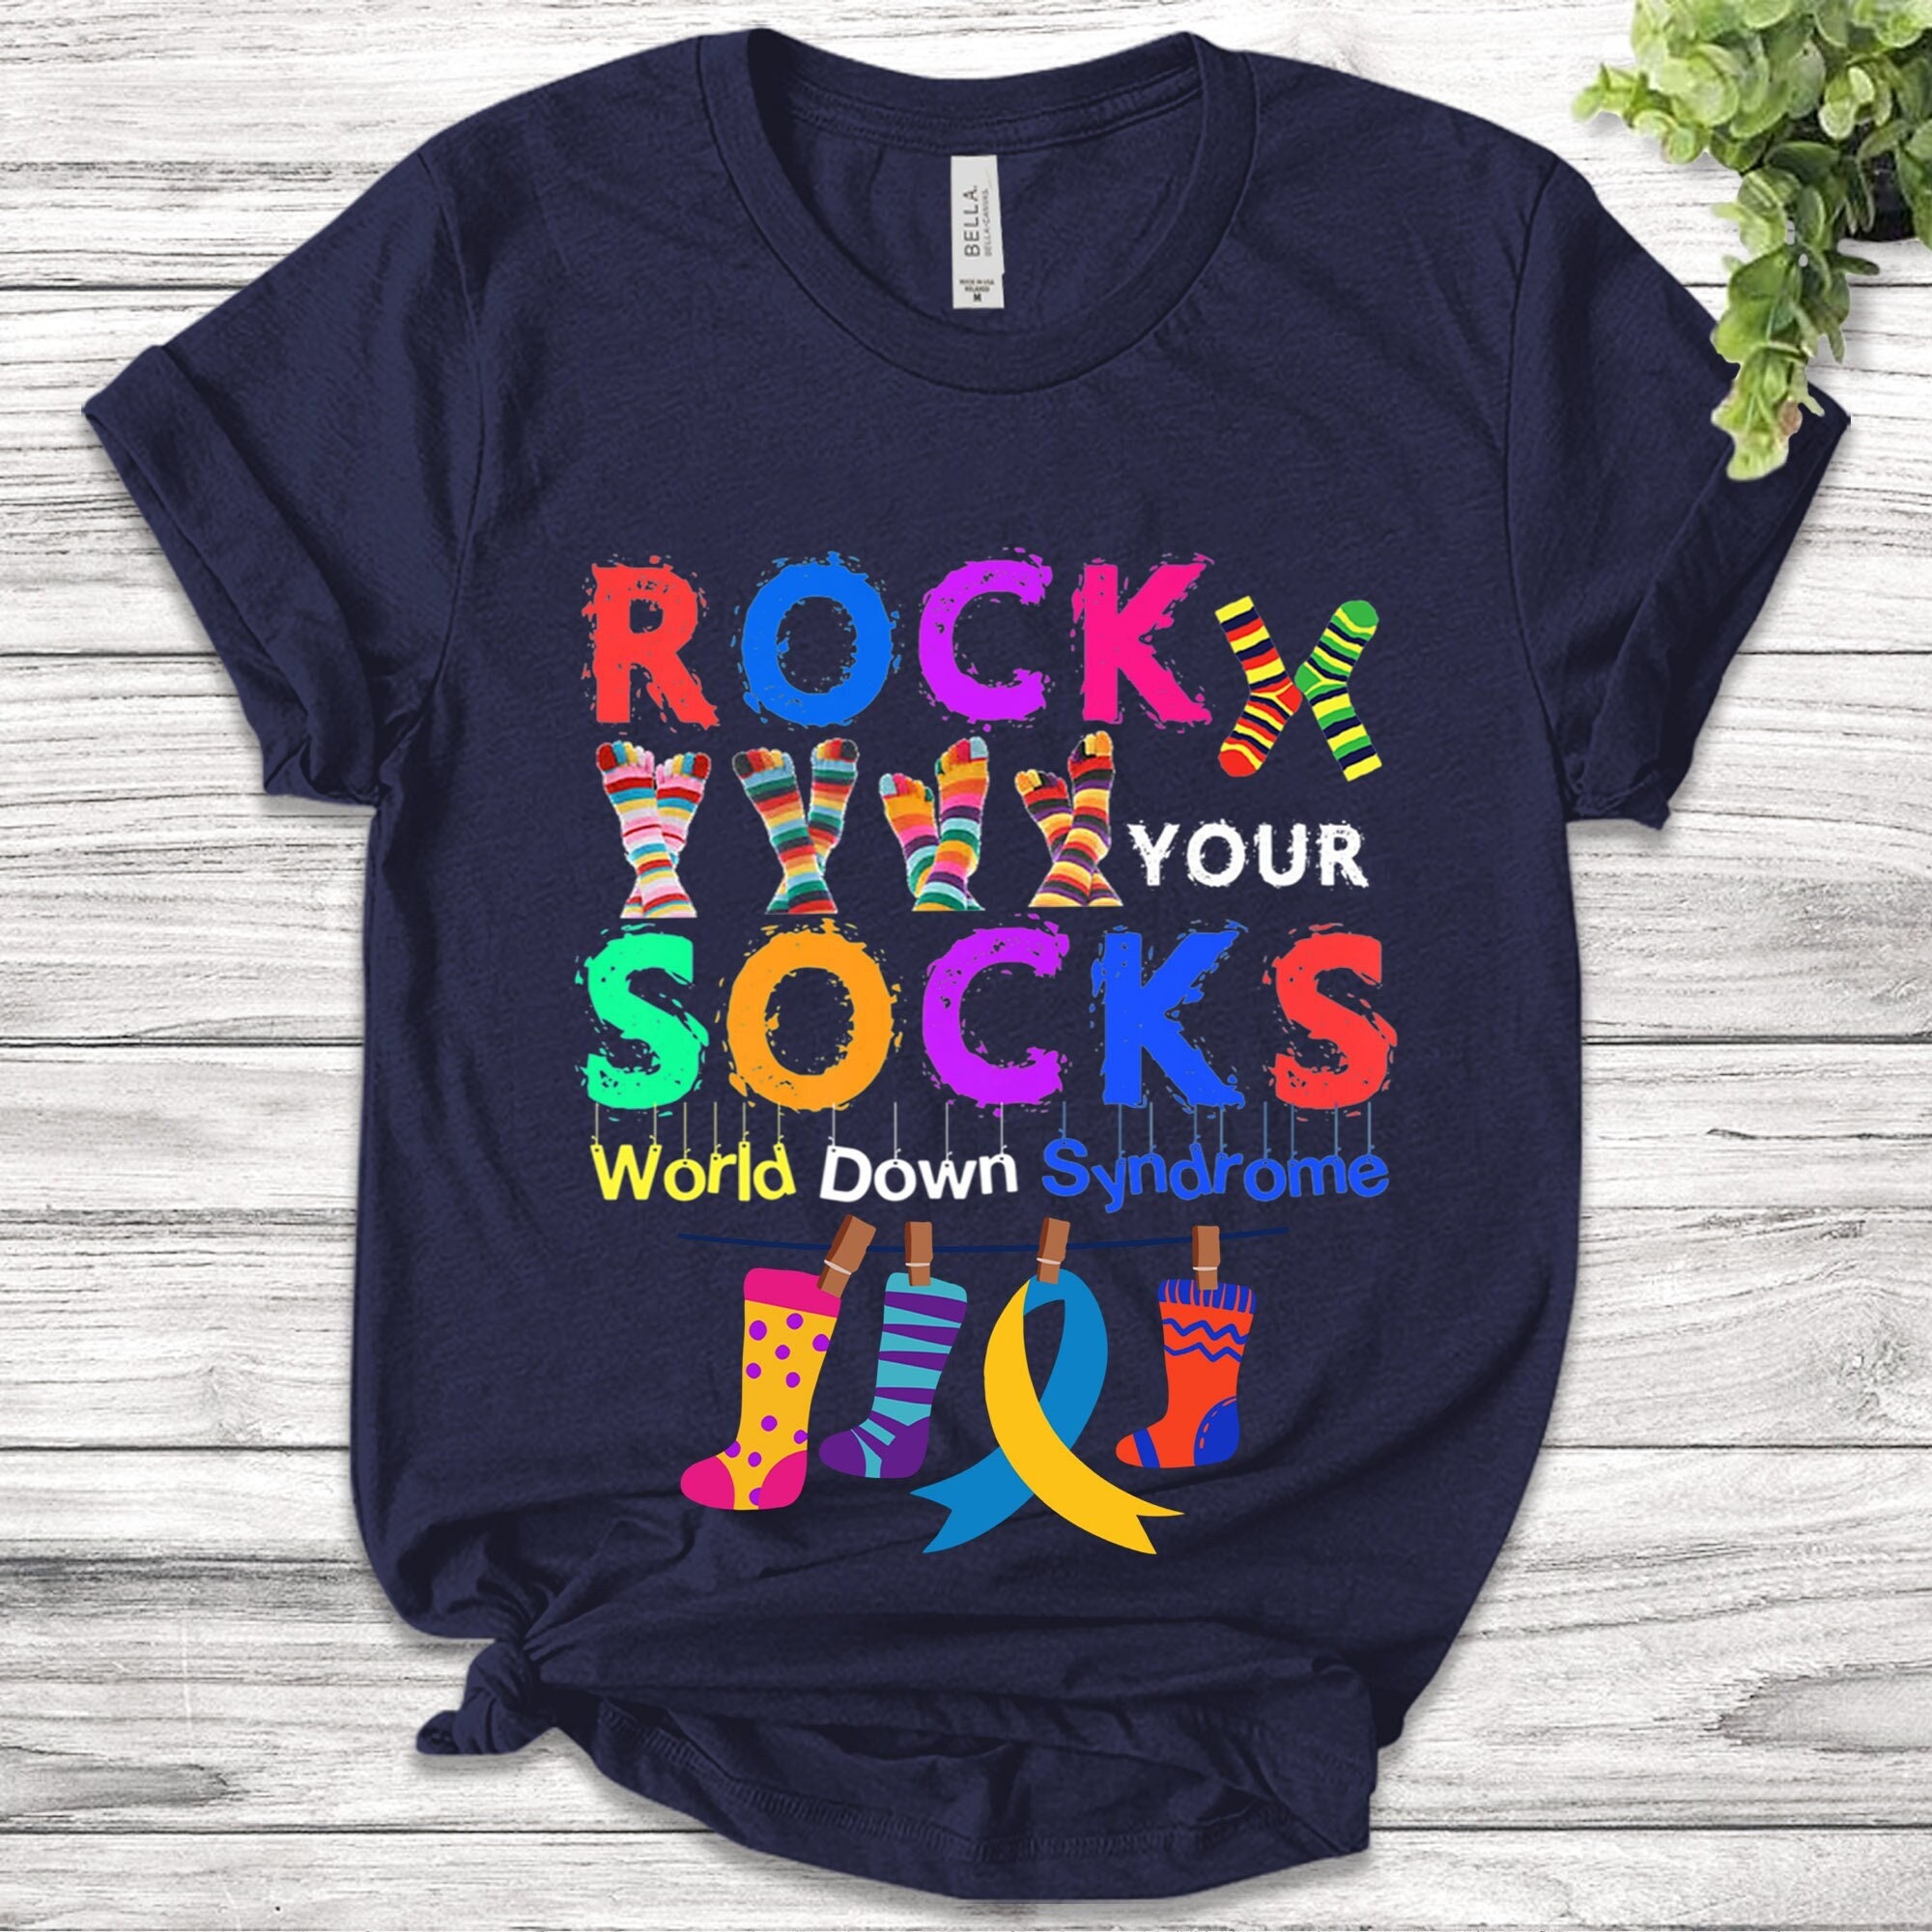 Rock Your Socks Down Syndrome Shirt, Down Syndrome Awareness Shirt, World Down Syndrome Day